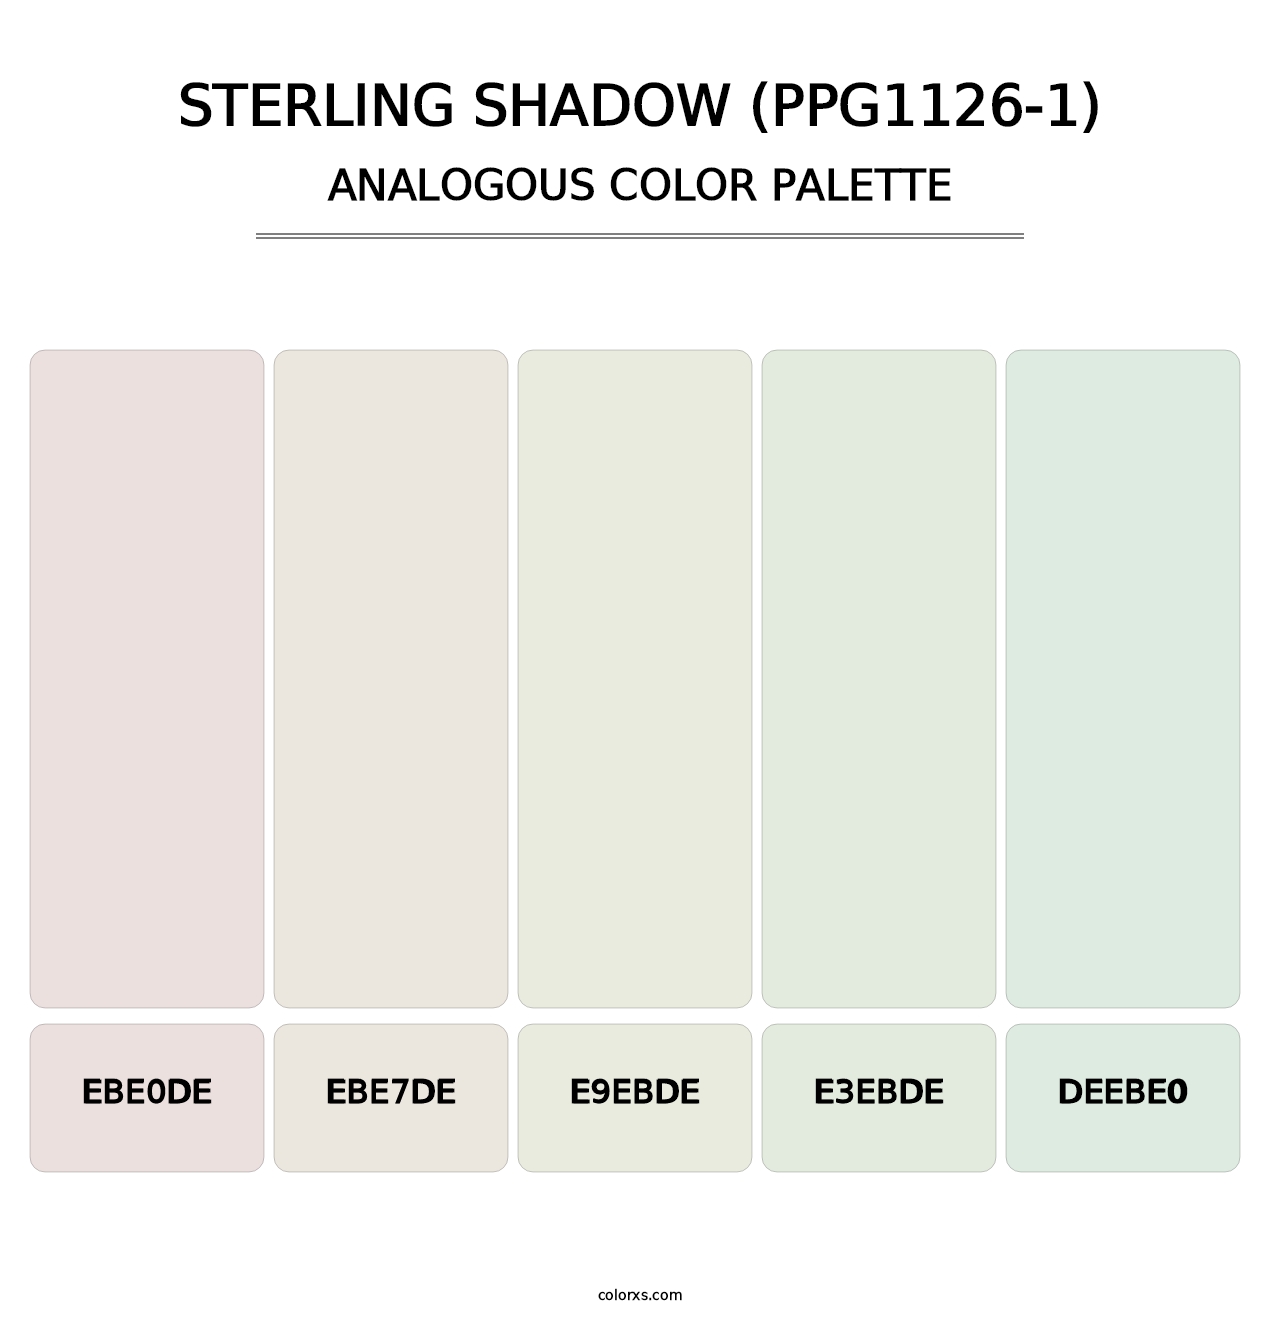 Sterling Shadow (PPG1126-1) - Analogous Color Palette